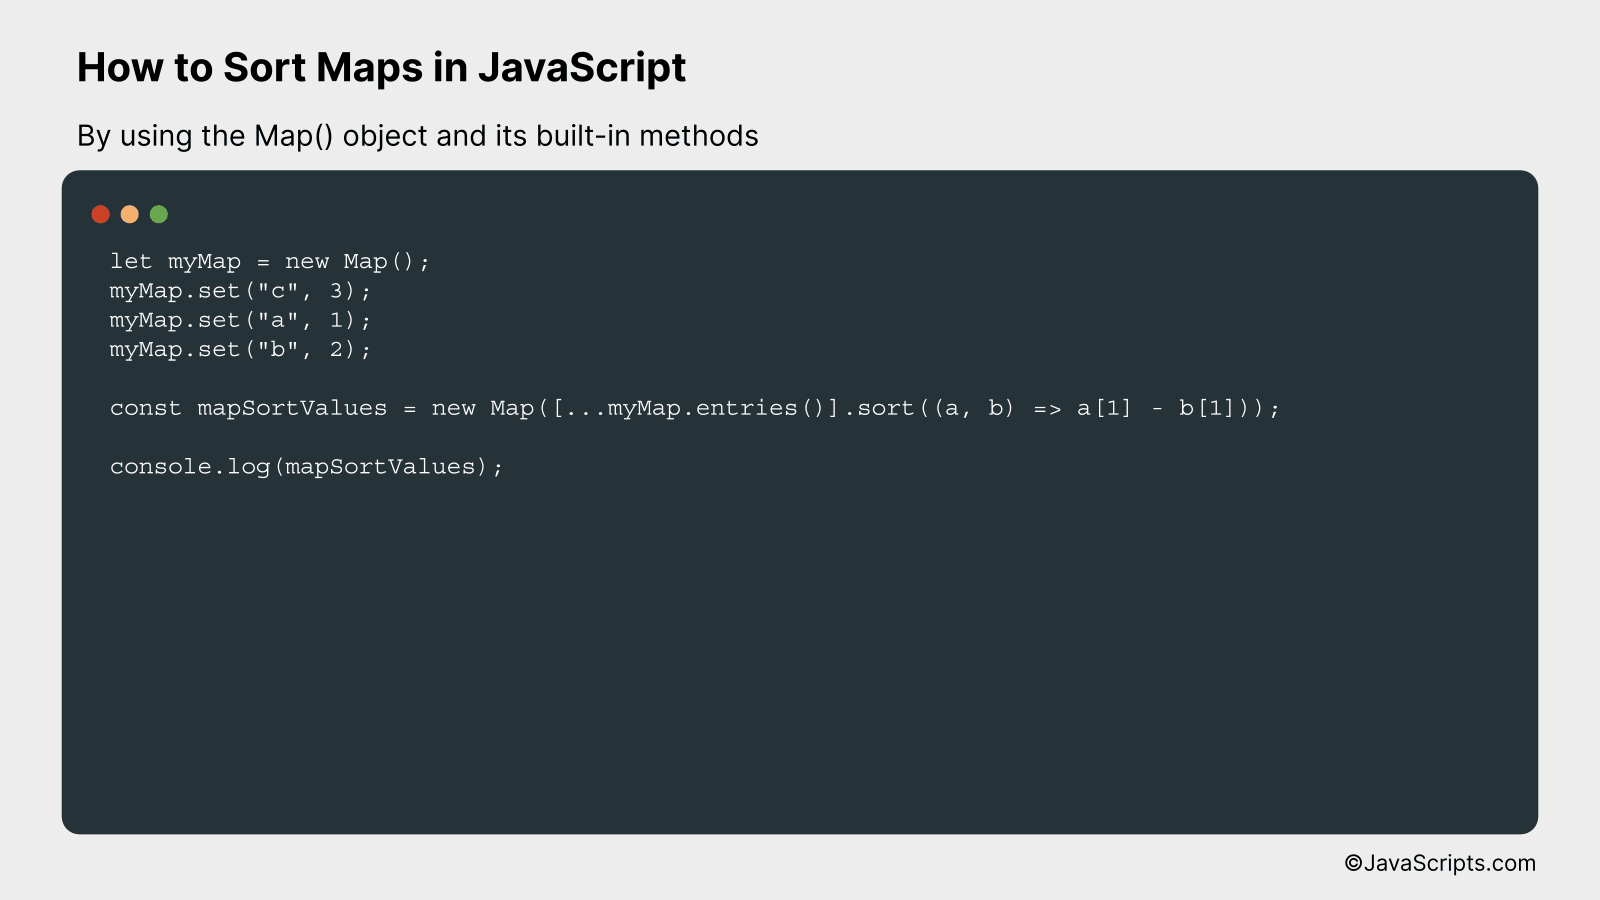 By using the Map() object and its built-in methods